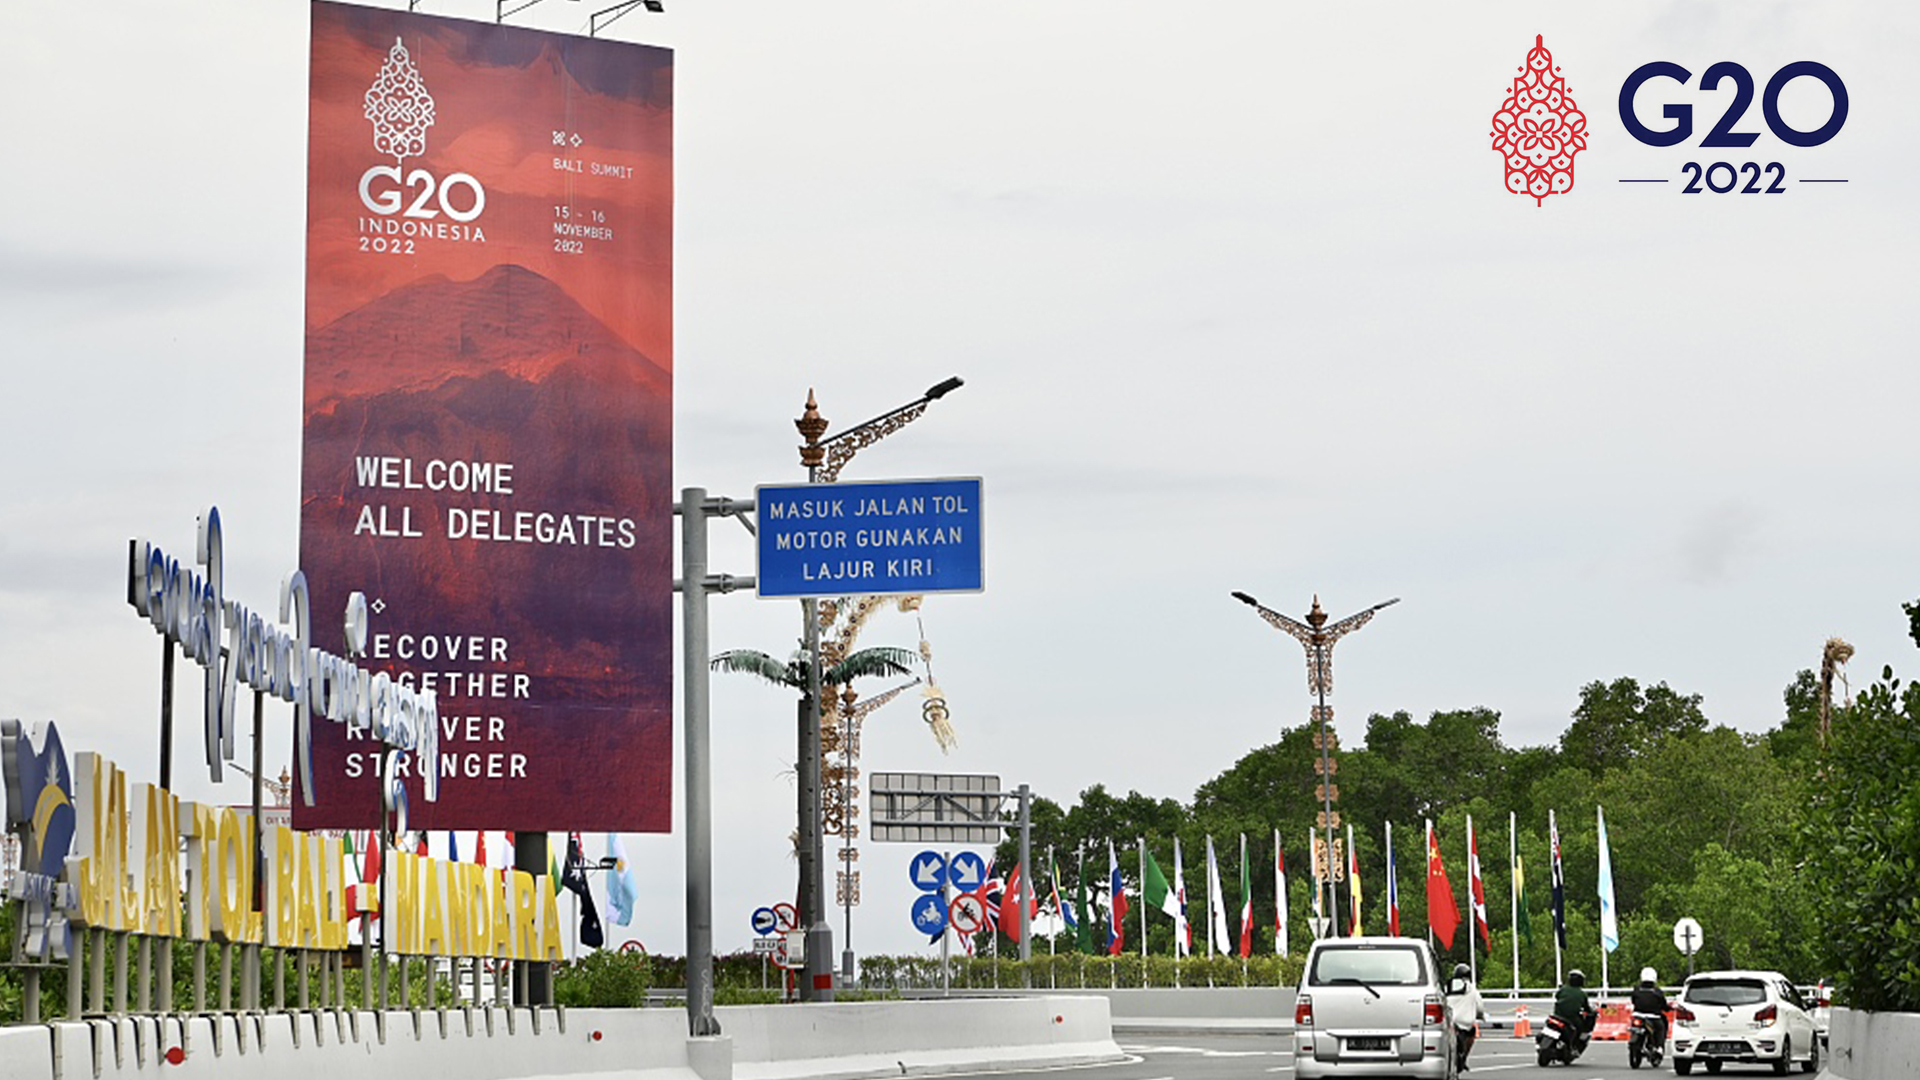 Live: Special coverage of bilateral meetings at G20 Summit 